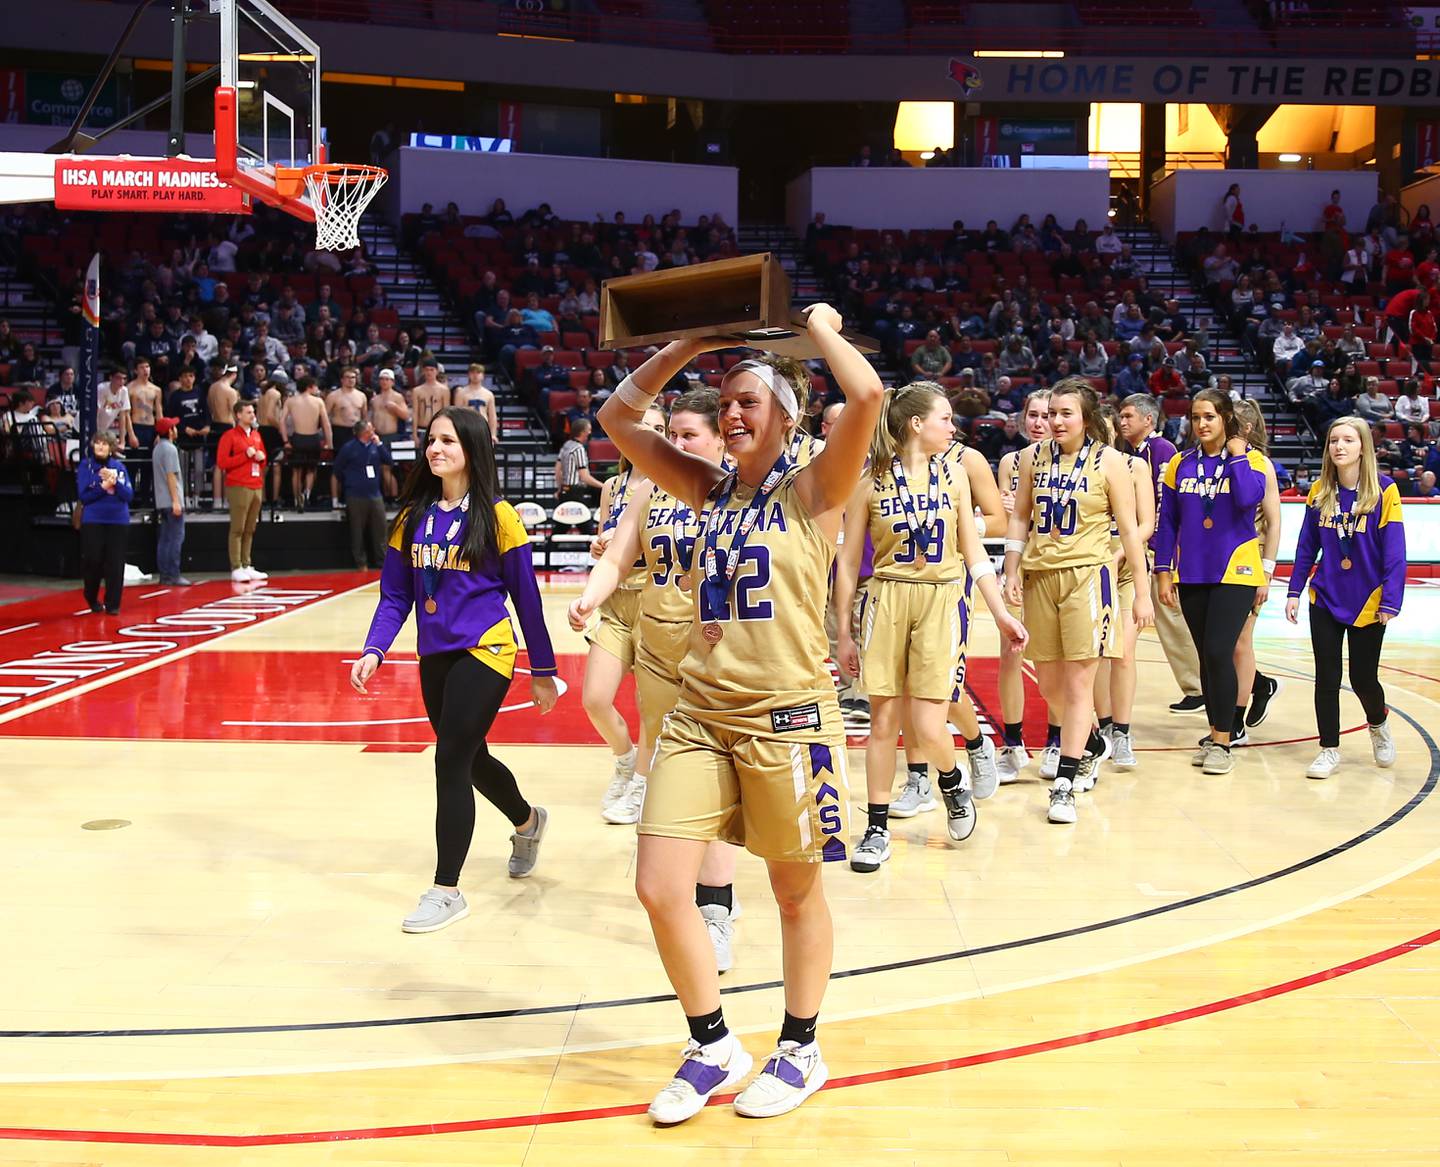 Serena's Katie Baker (22) lifts the fourth-place trophy after the Class 1A girls basketball third-place game on Thursday, March 3, 2022, at Redbird Arena in Normal.